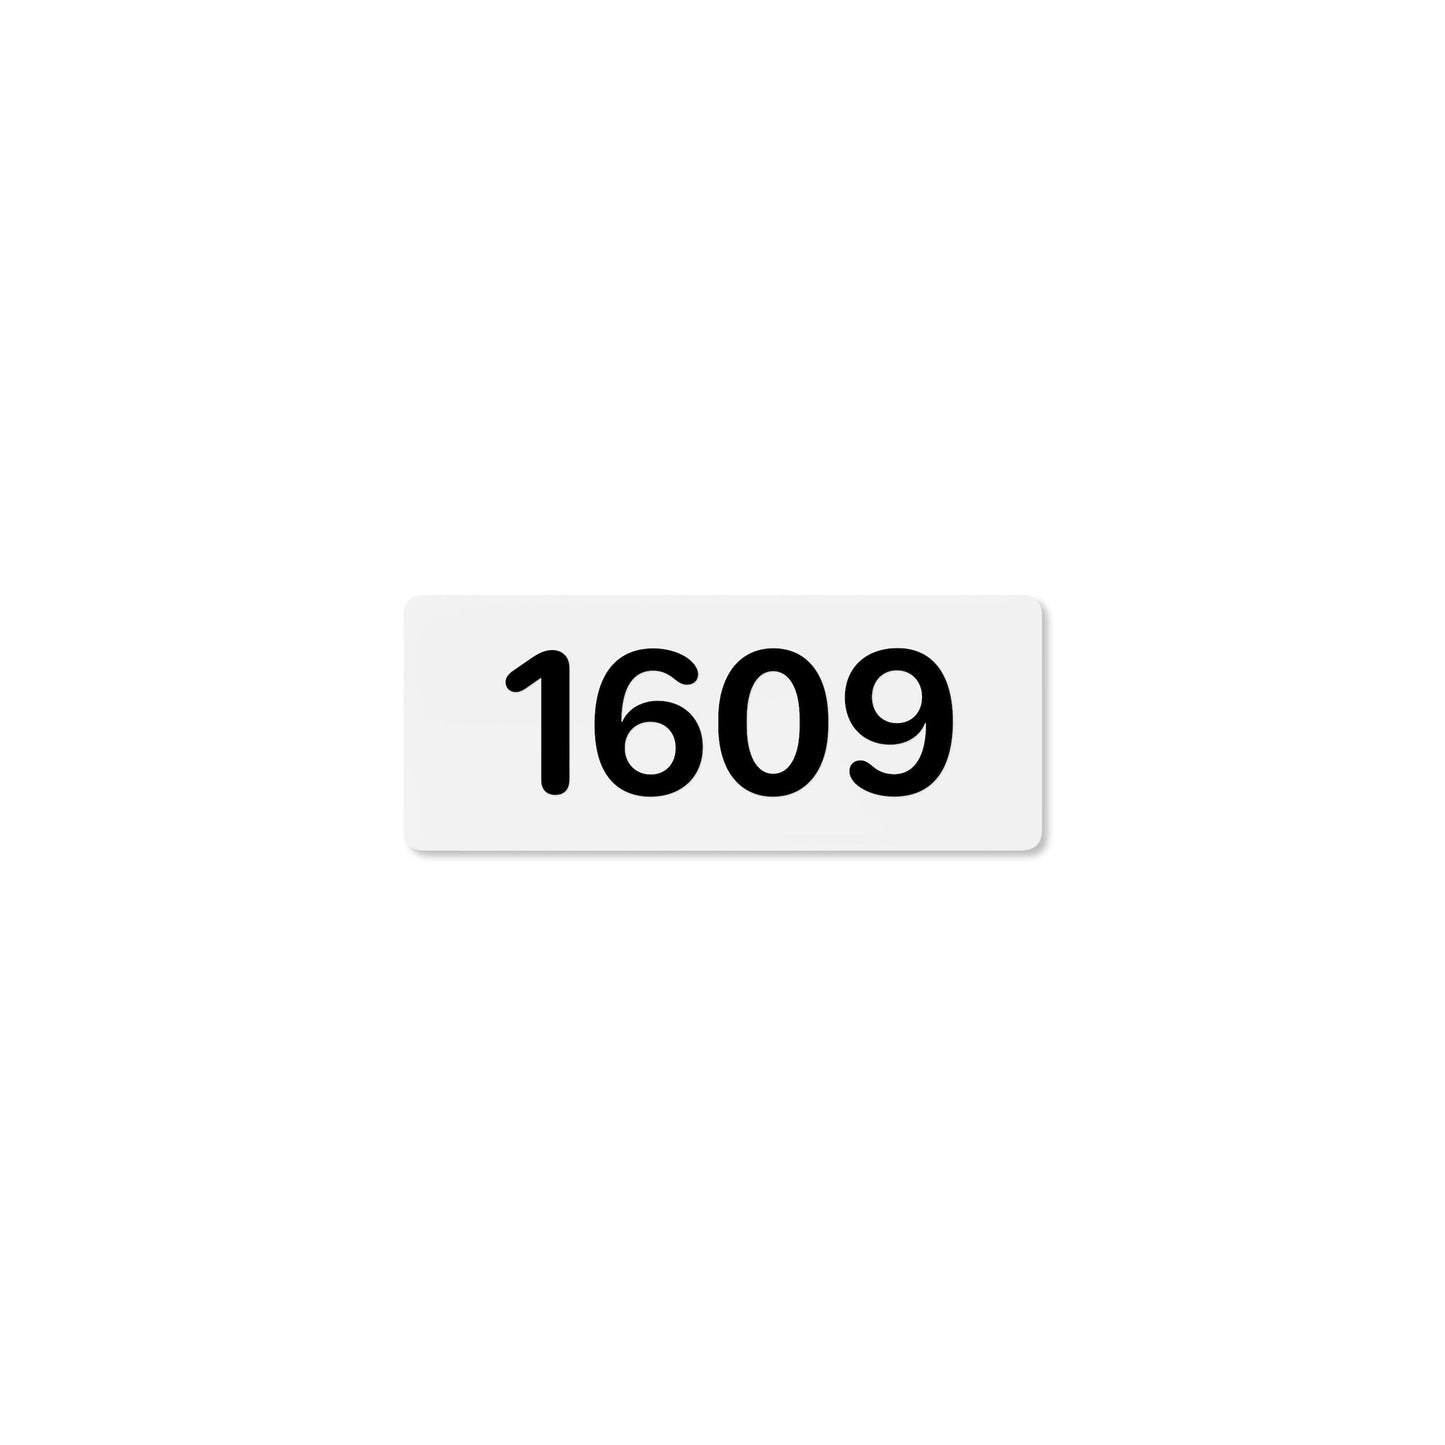 Numeral 1609